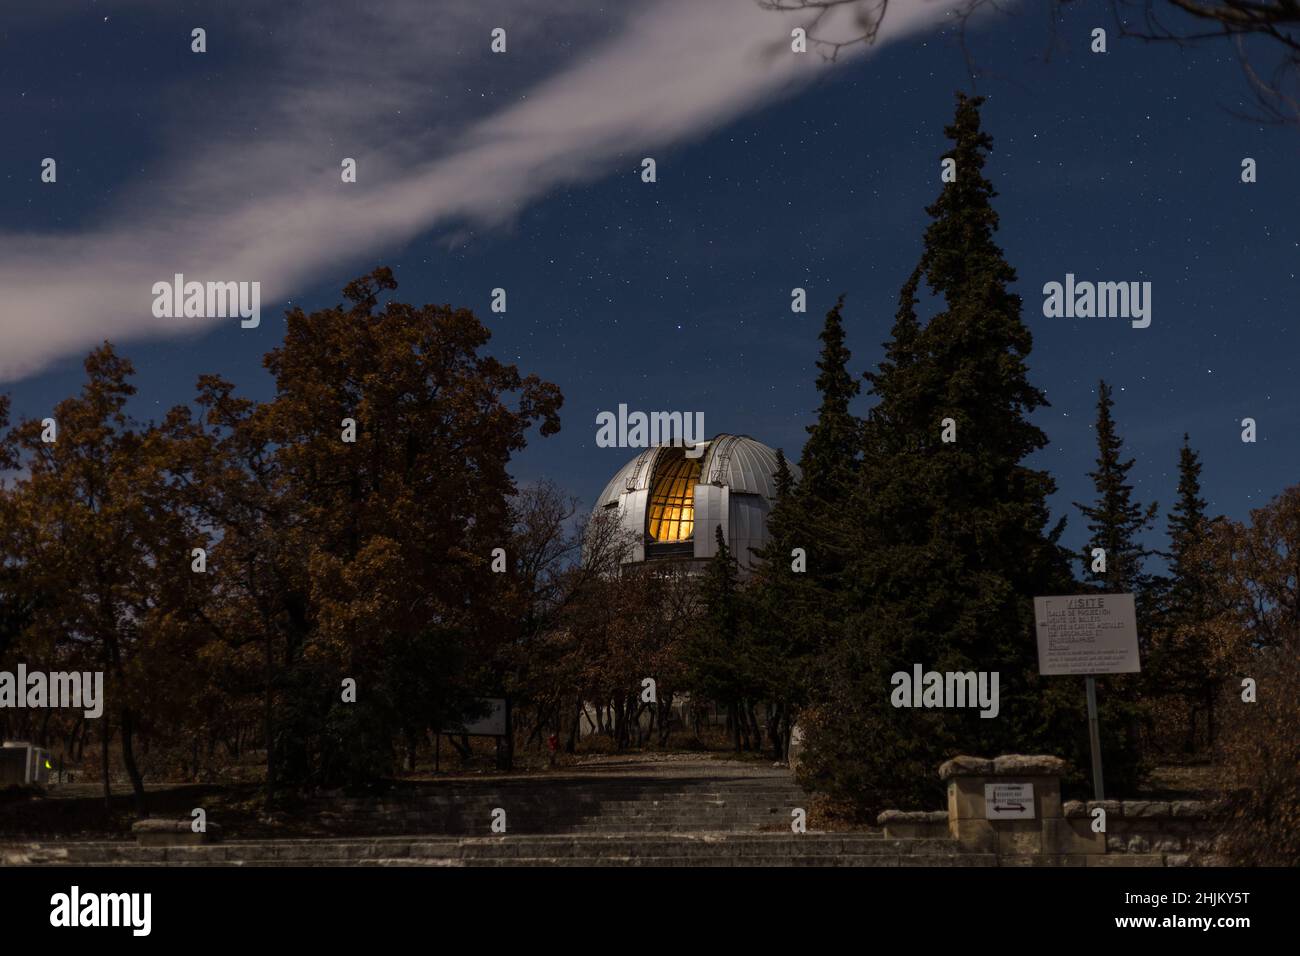 observatory astronomical dome in night sky Stock Photo